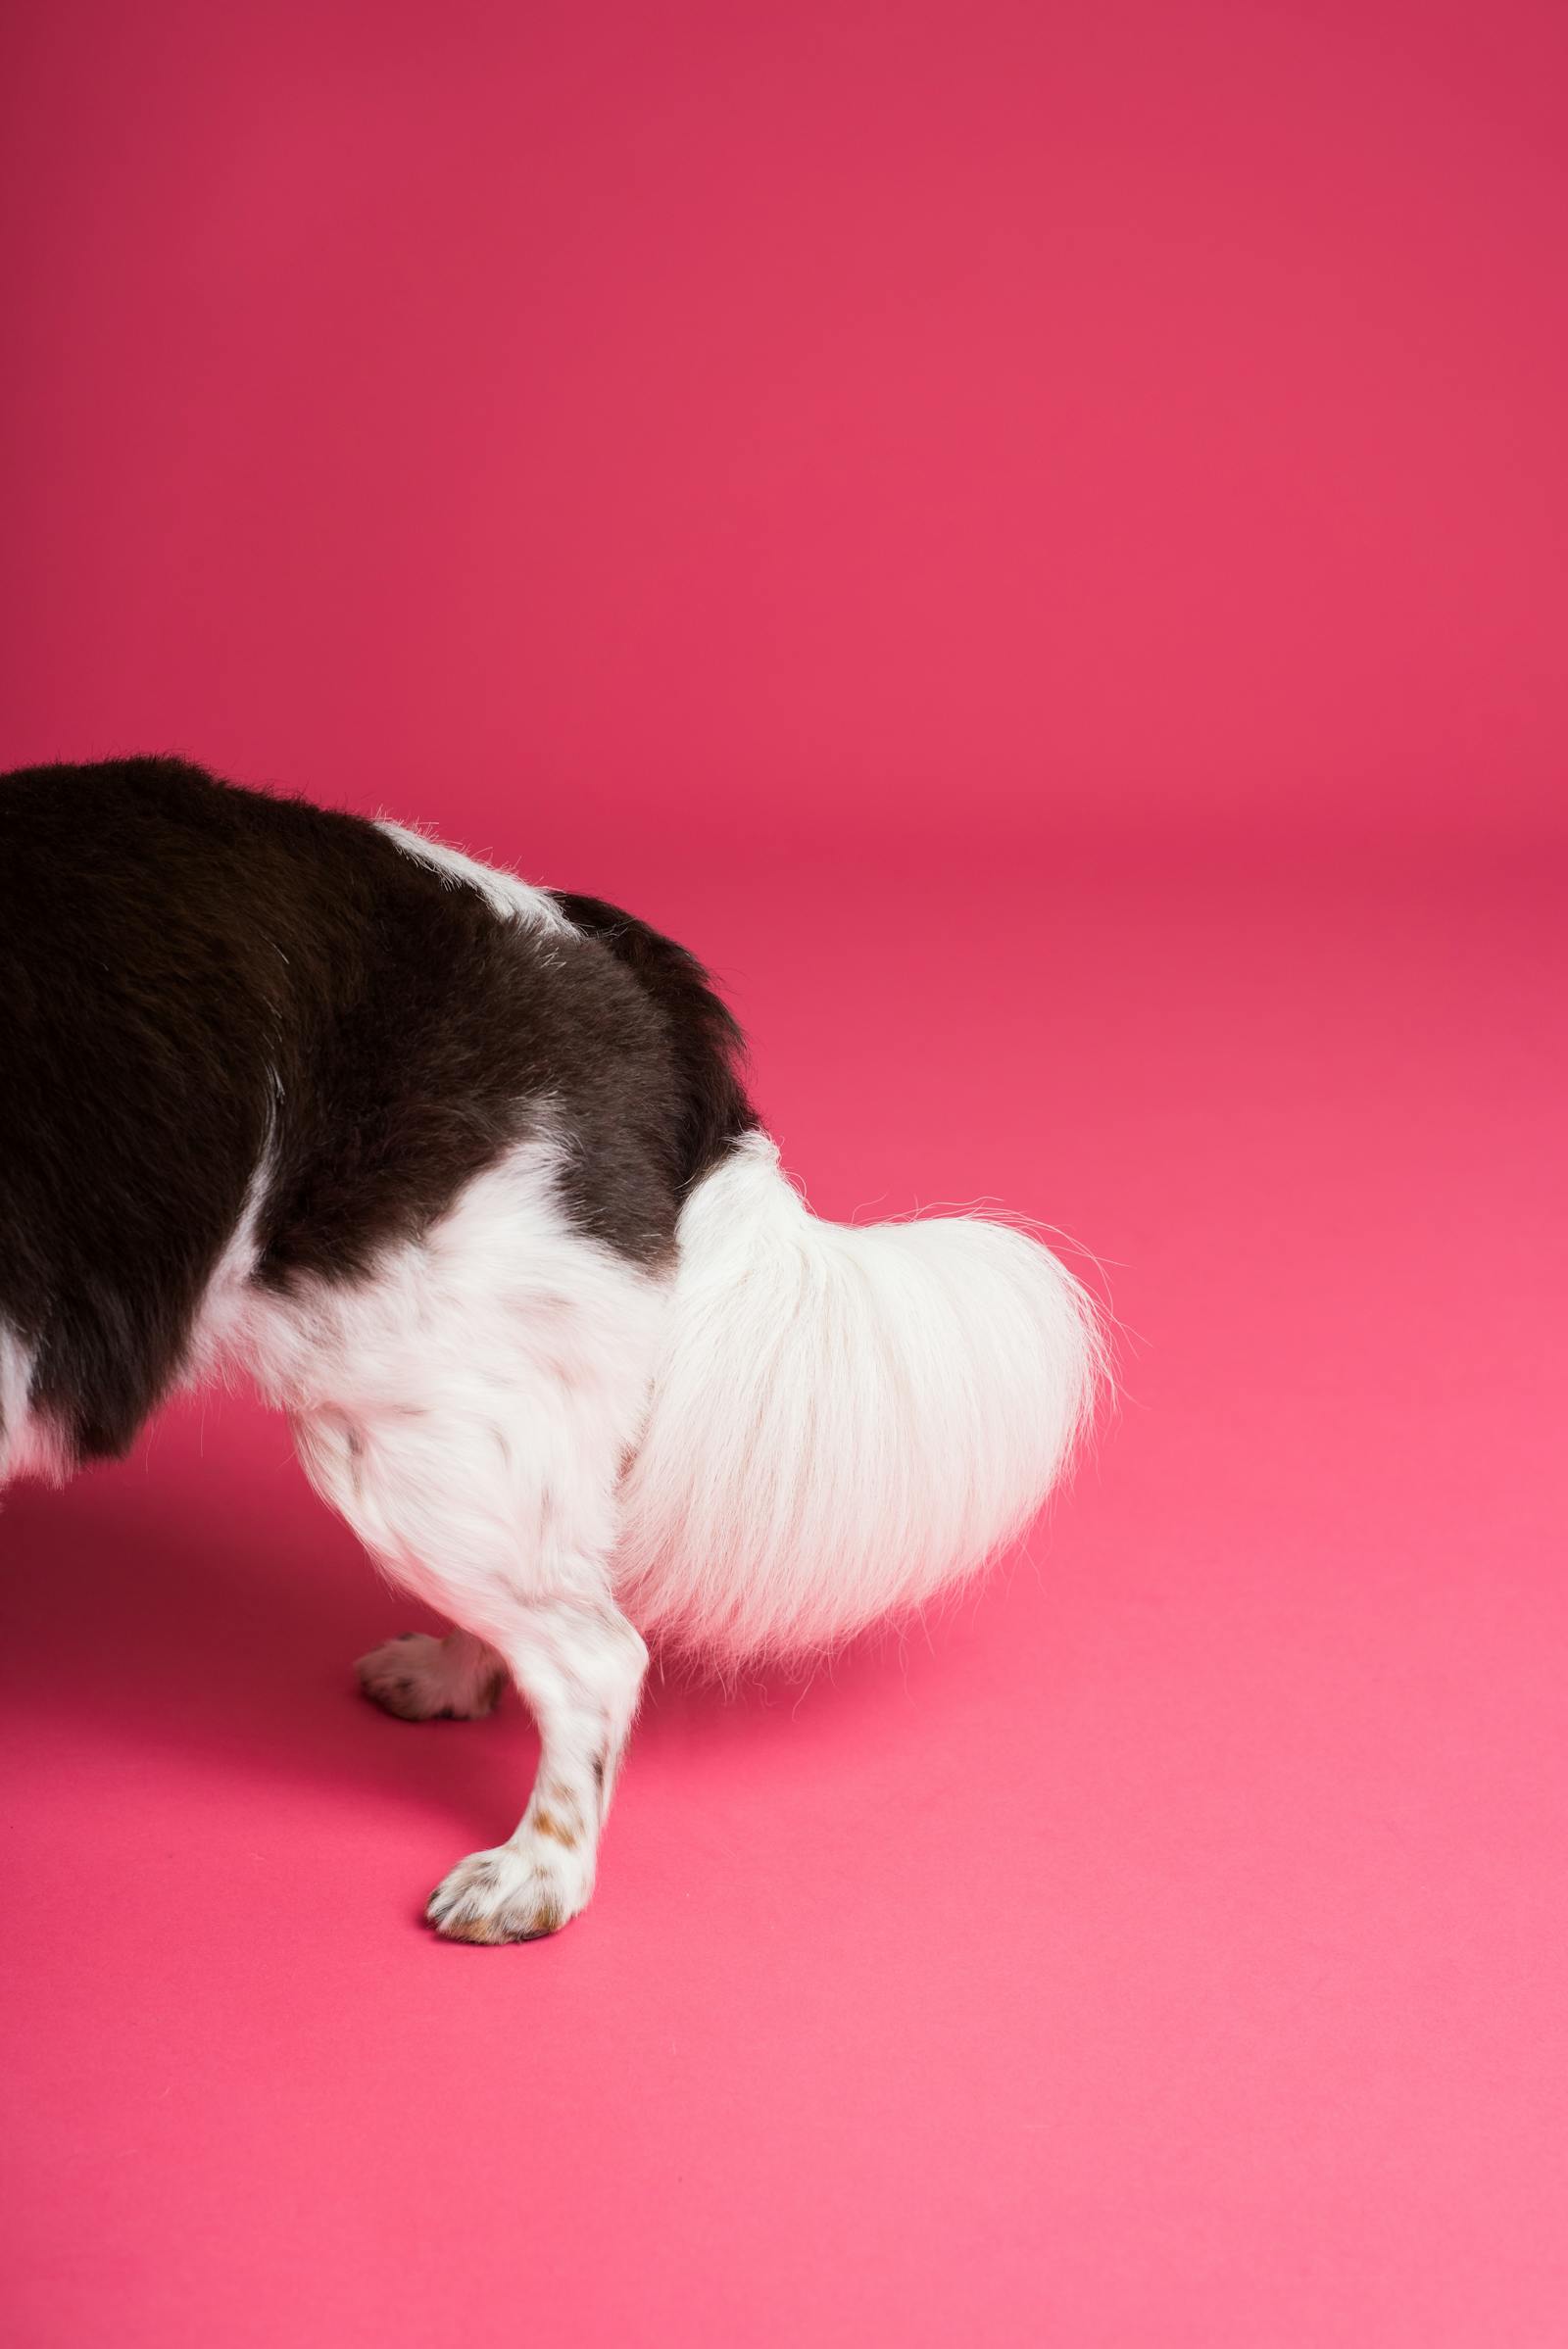 Why is it that dogs wag their tails?